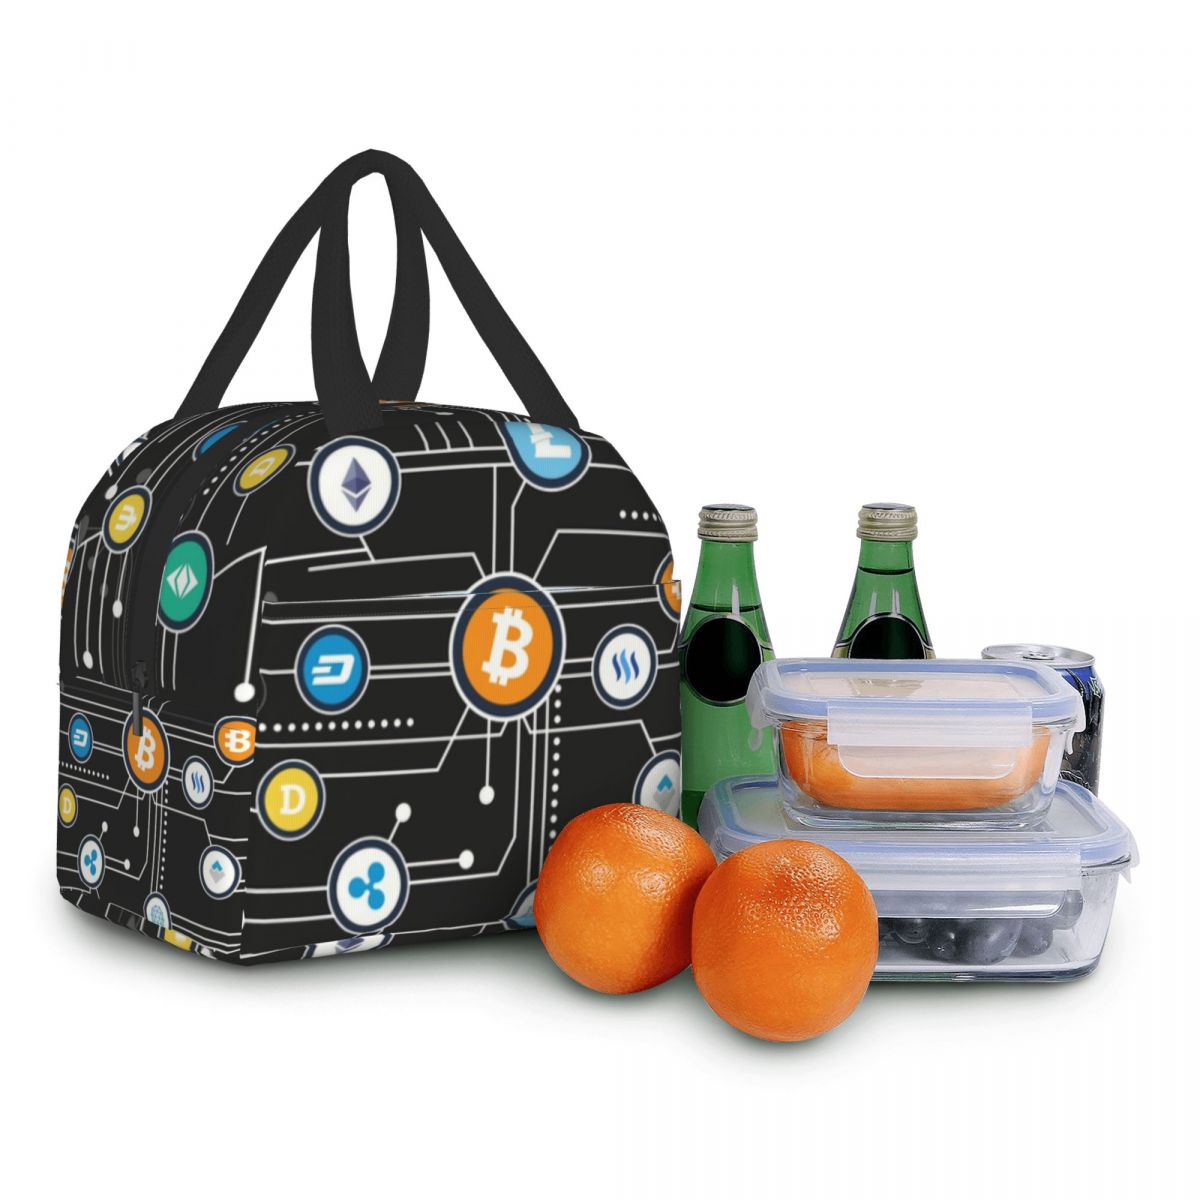 Cryptocurrency Bitcoin Altcoin  Lunch Bag,